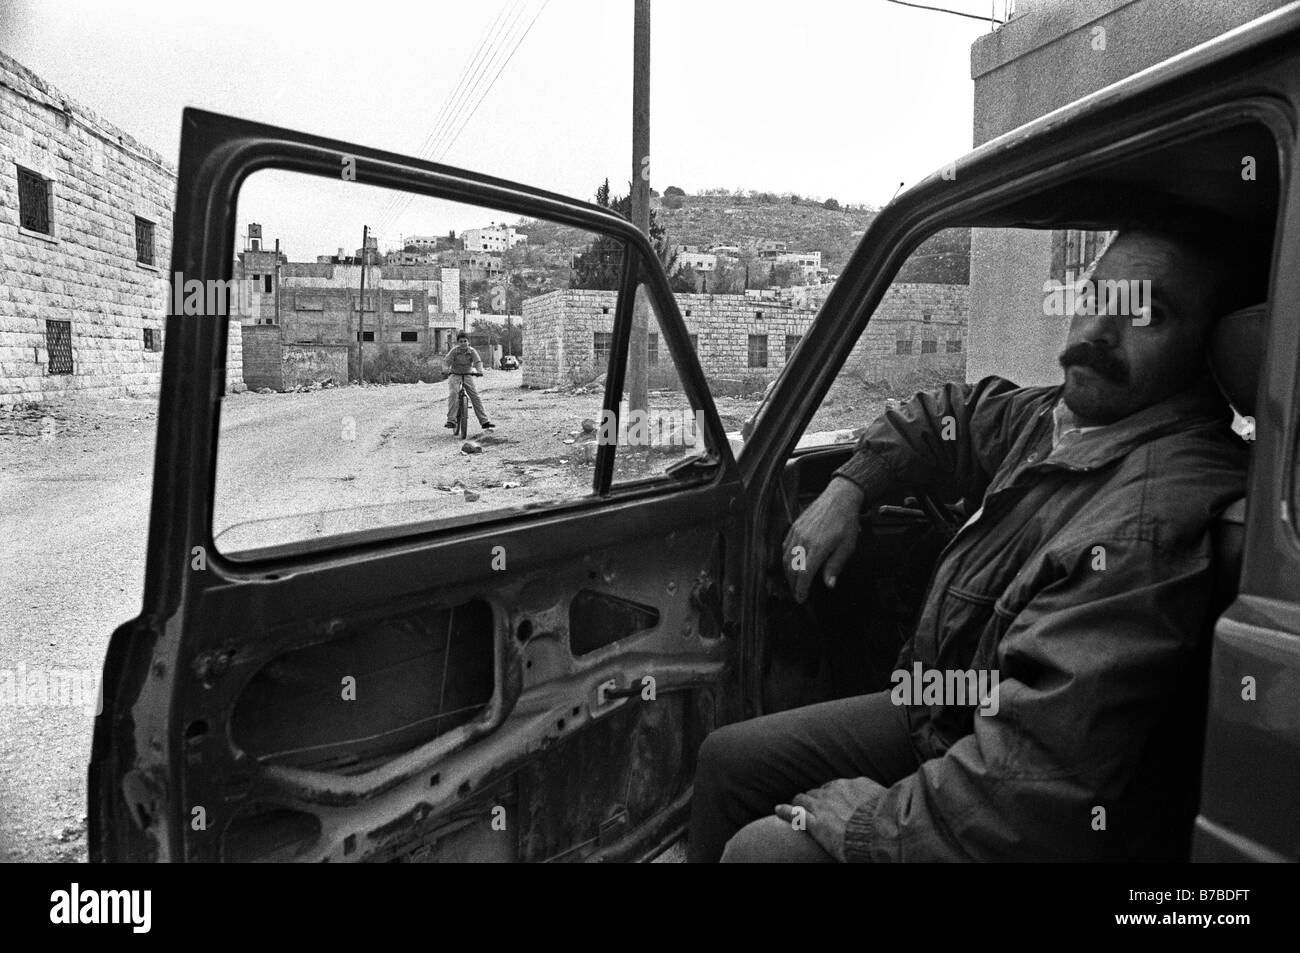 Palestinian villager sitting inside an abandoned car at the West Bank Israel Stock Photo